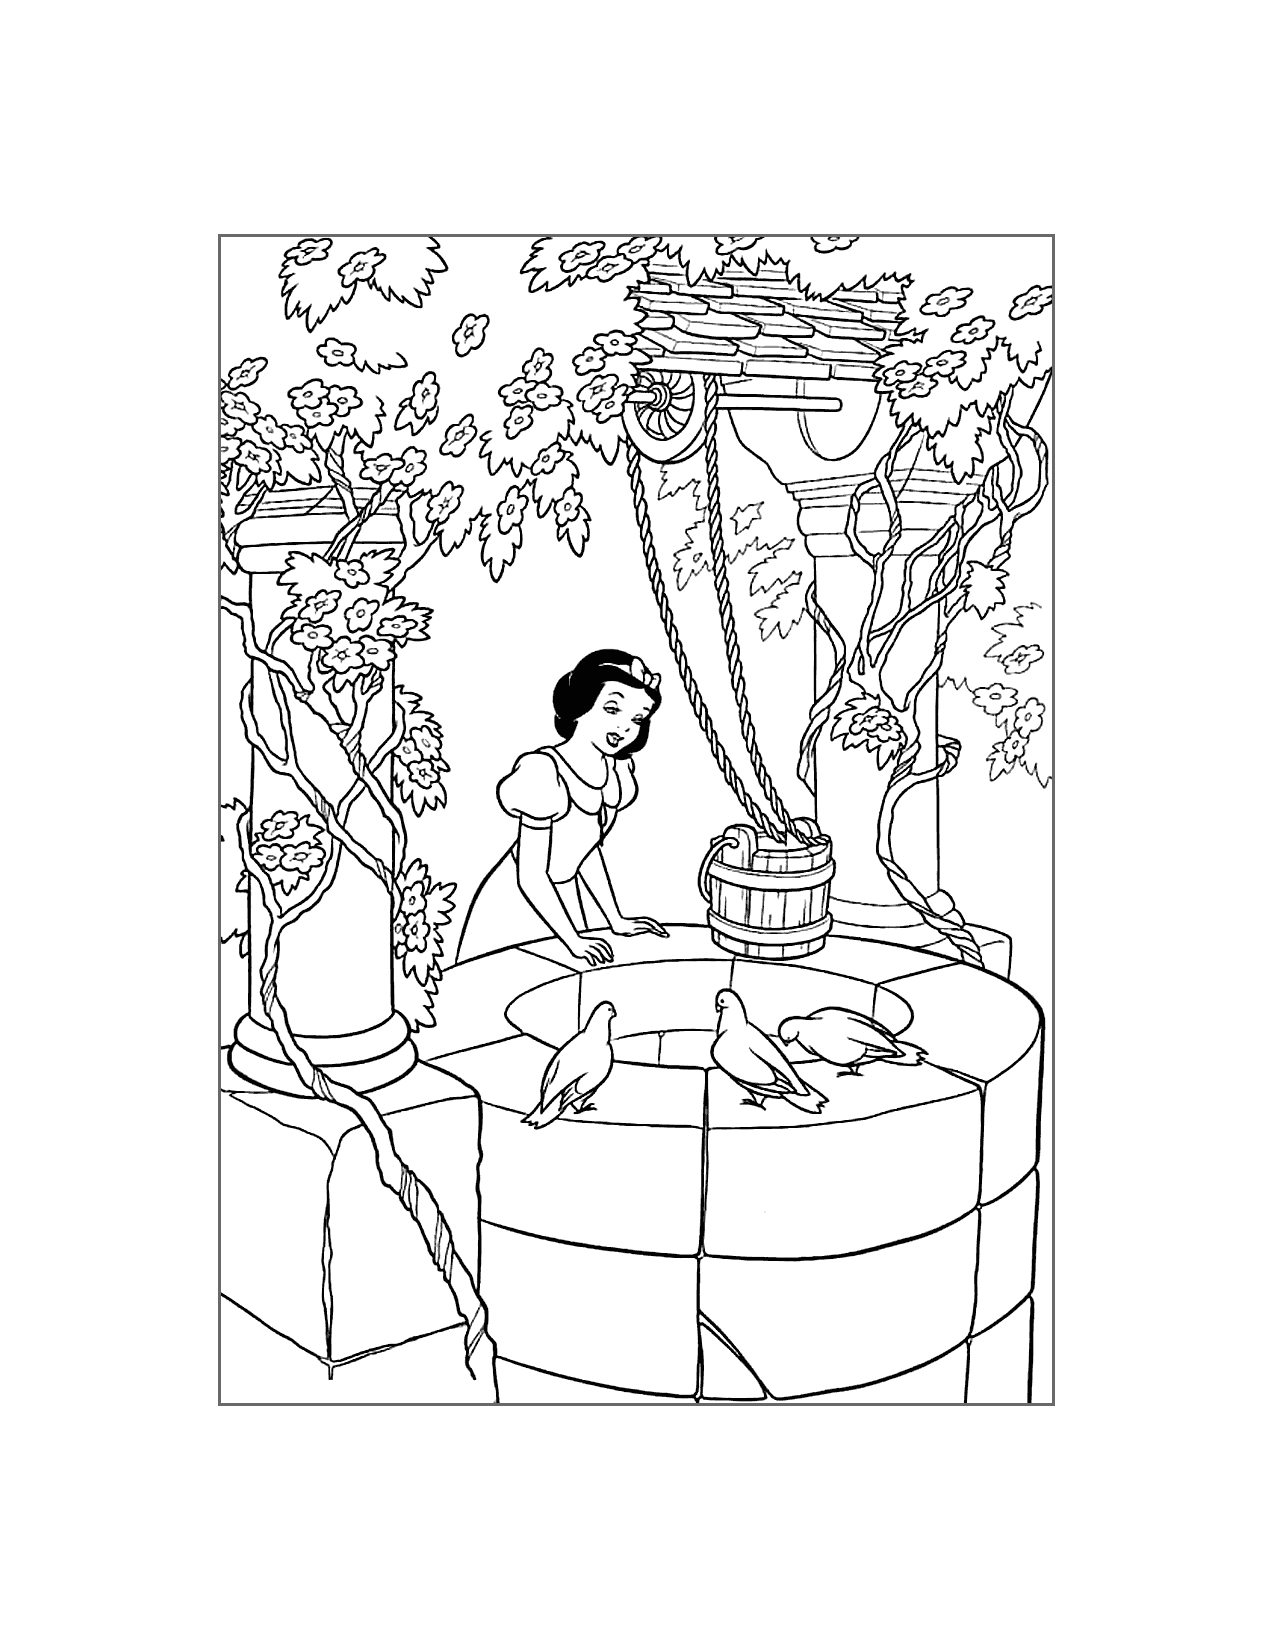 Snow White Wishes At The Well Coloring Page